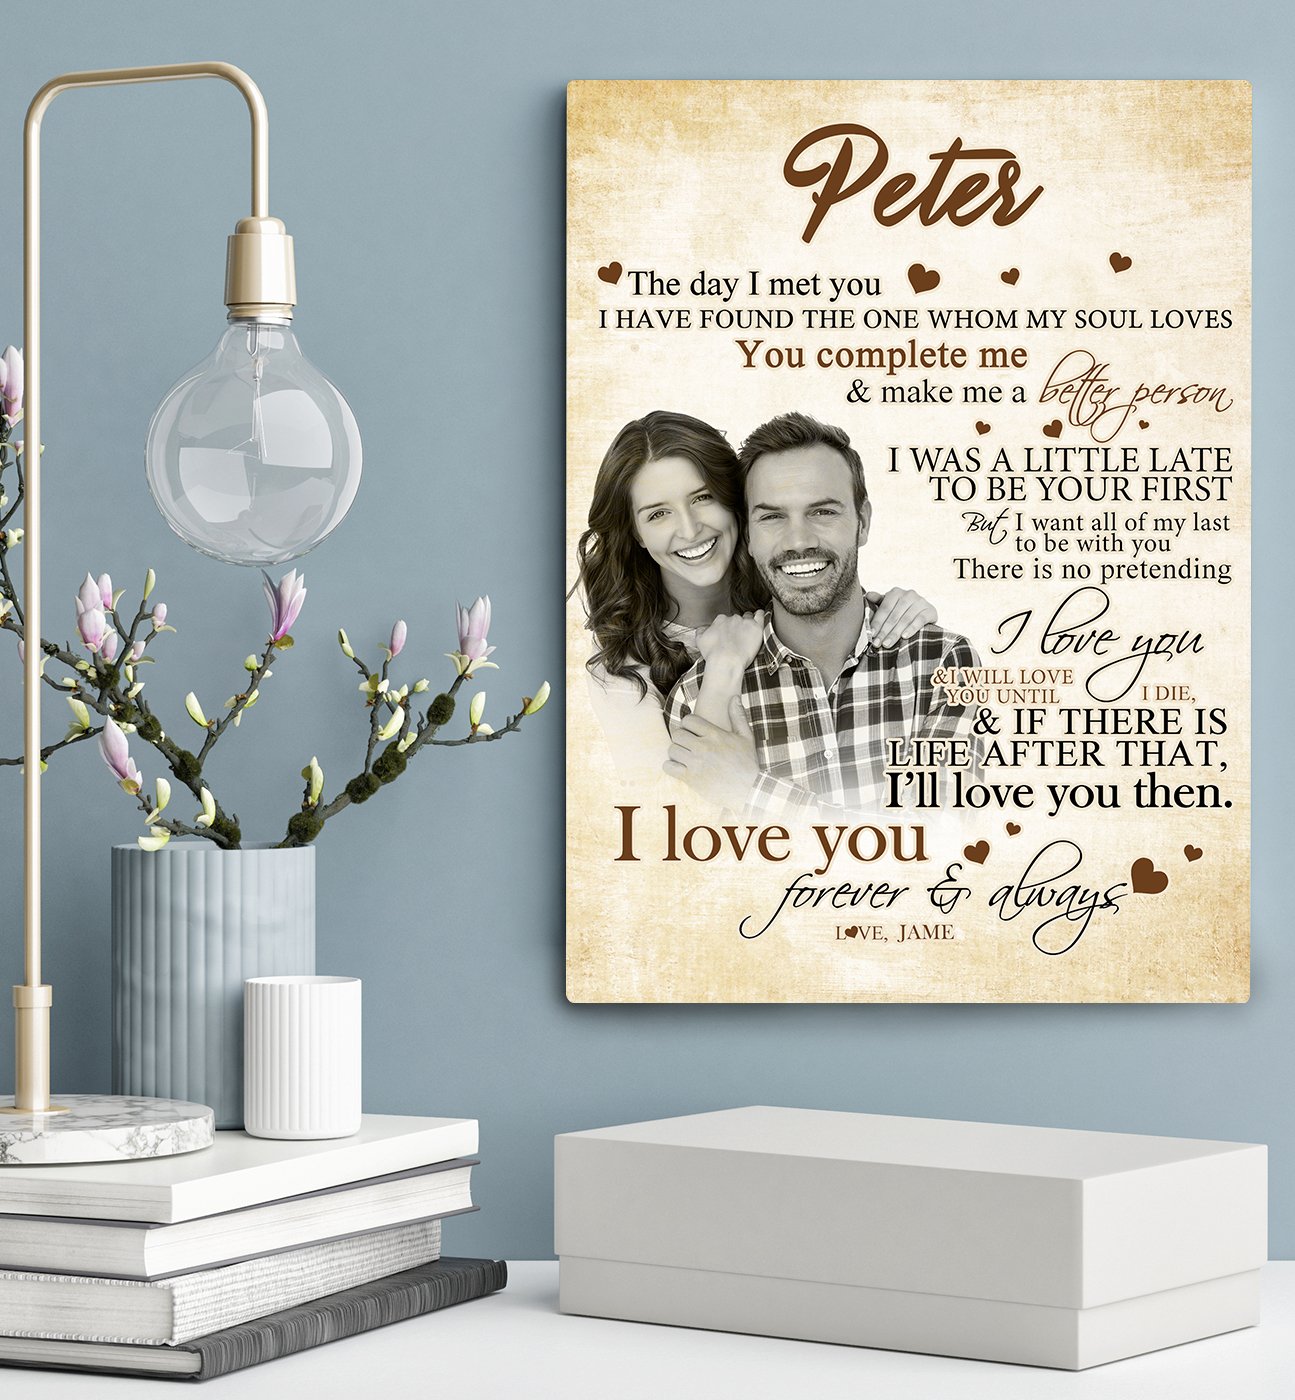 Custom Personalized photo name canvas prints painting wall art Valentine gift idea for him boyfriend husband her girlfriend wife couple - The Day I Met You TY1112